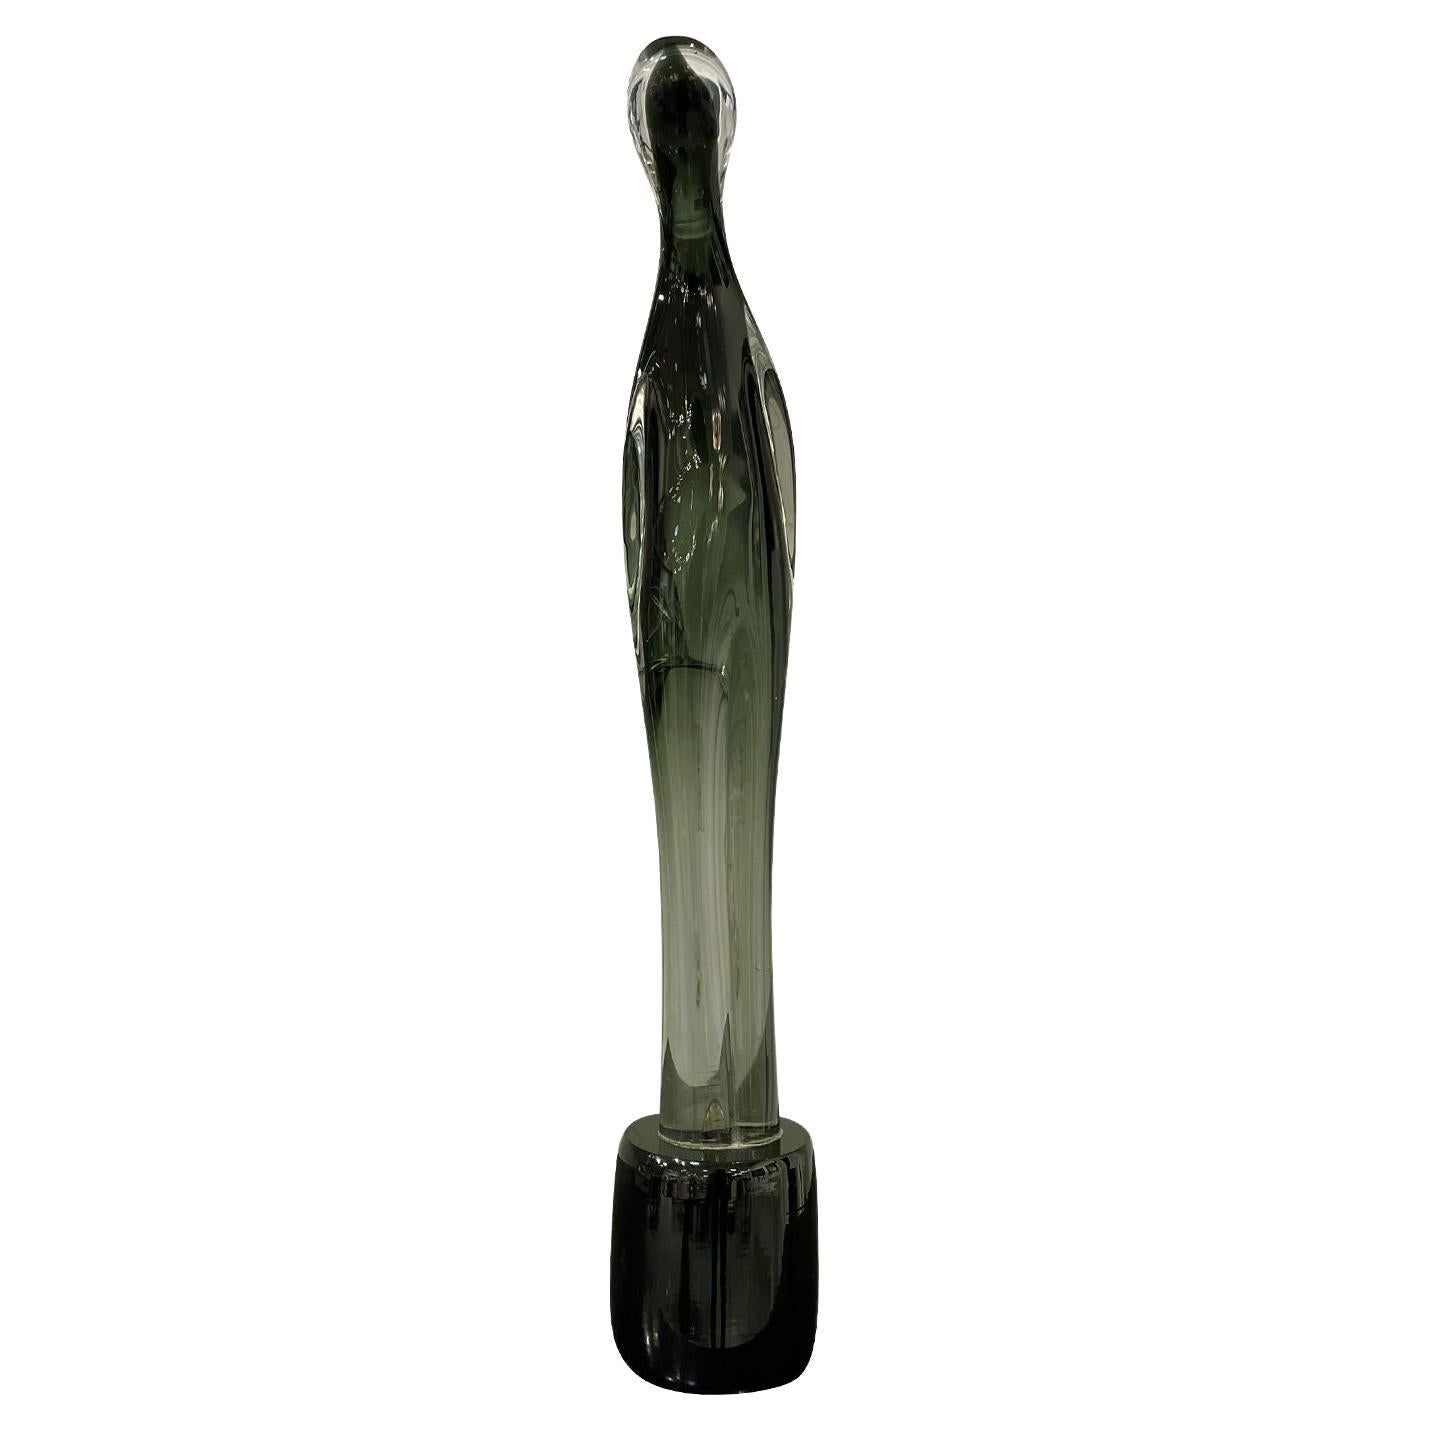 20th Century Green-Black Italian Large Vintage Abstract Murano Glass Sculpture